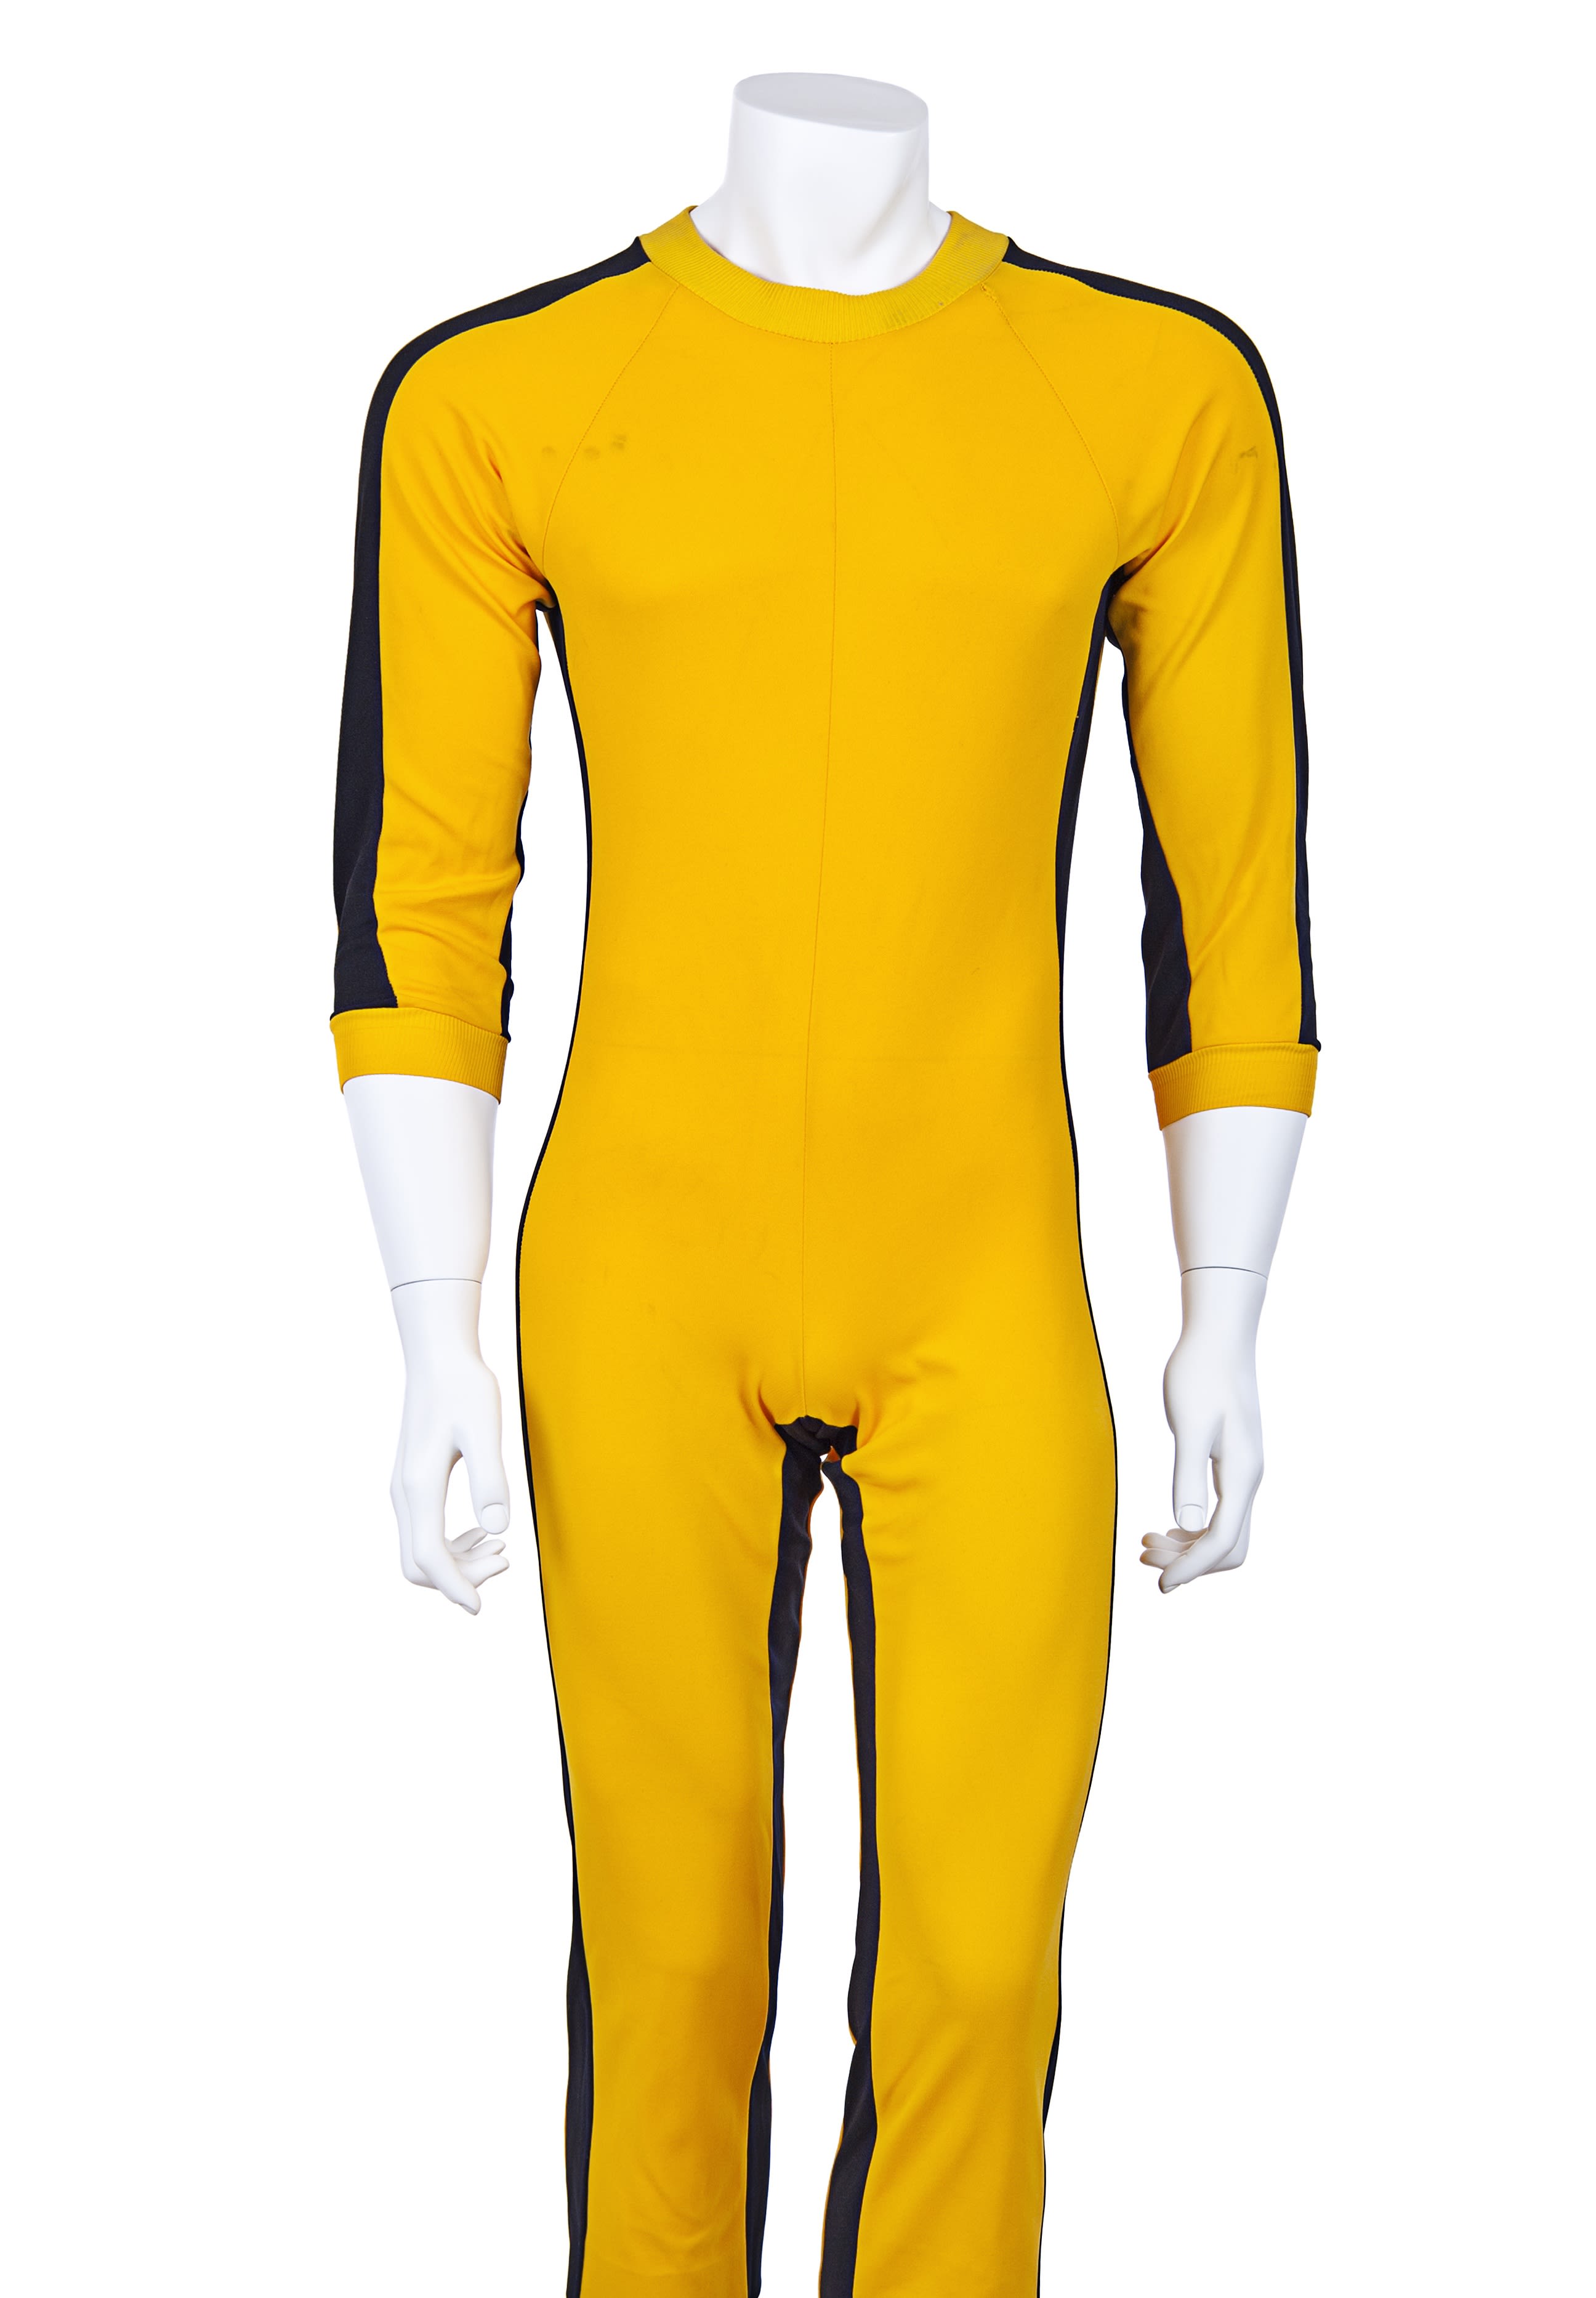 Oorzaak zijde Maak los Bruce Lee's iconic jumpsuit fetches $100,000 at auction | CNN